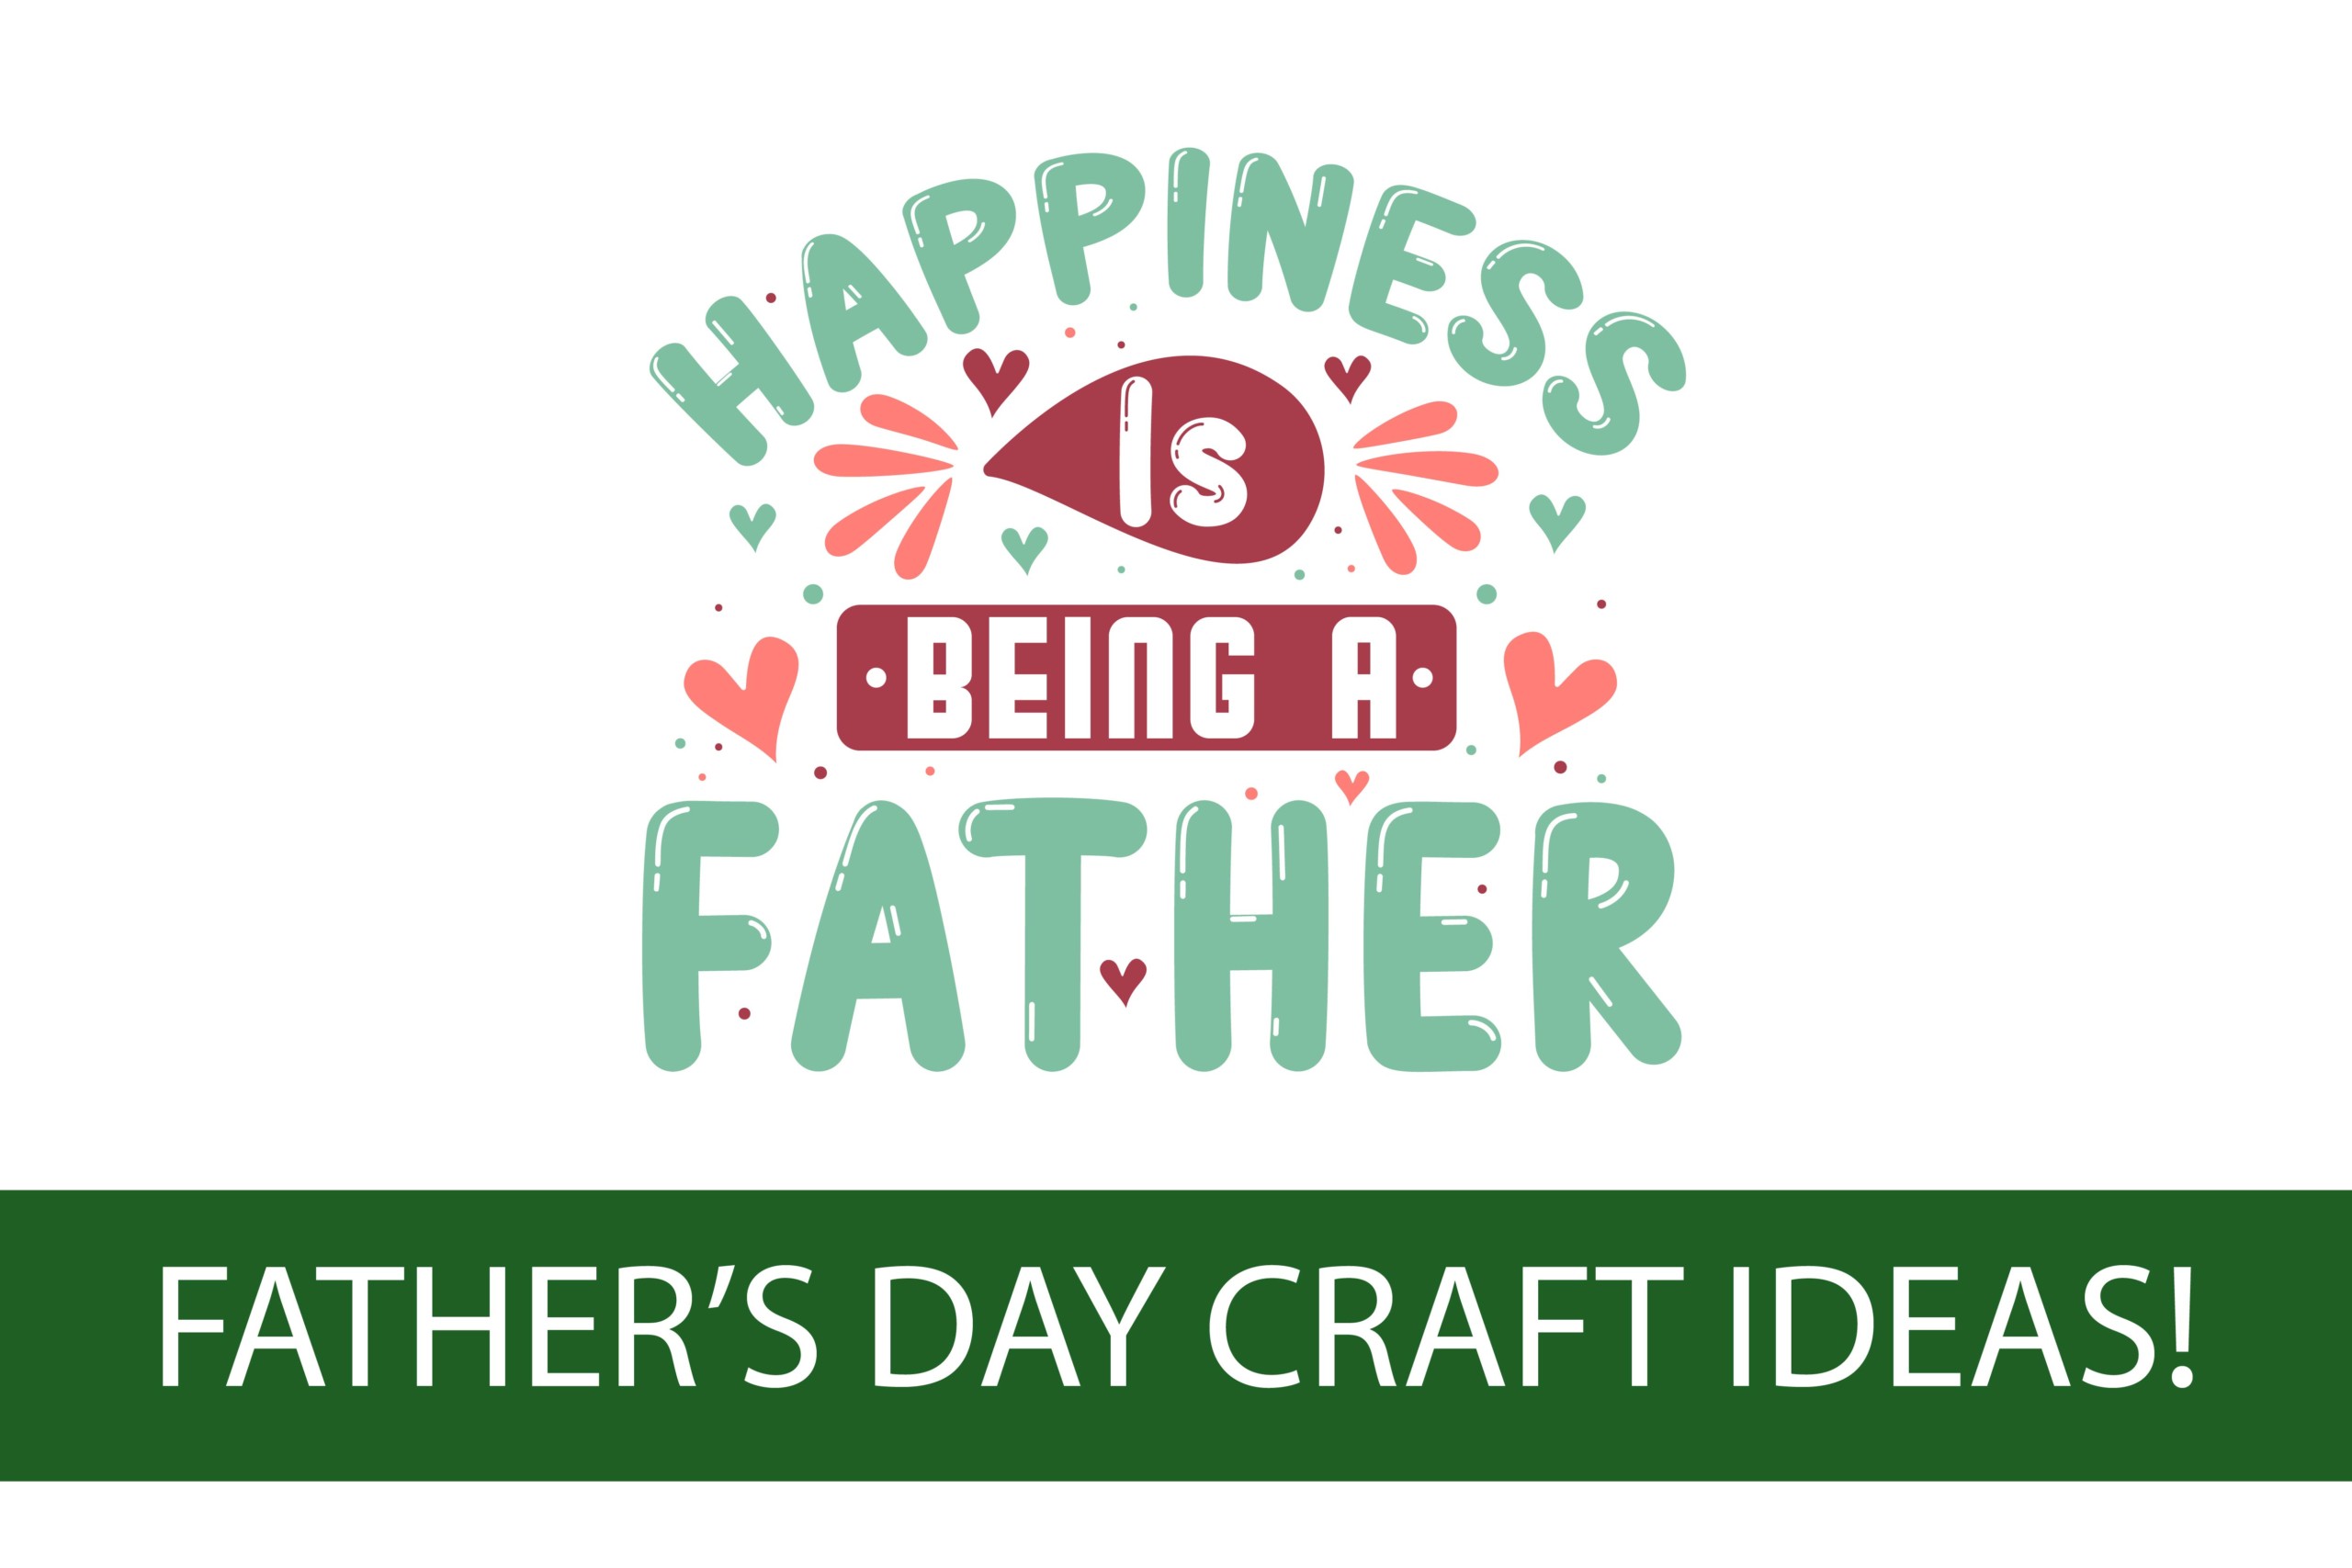 Father’s day crafting ideas